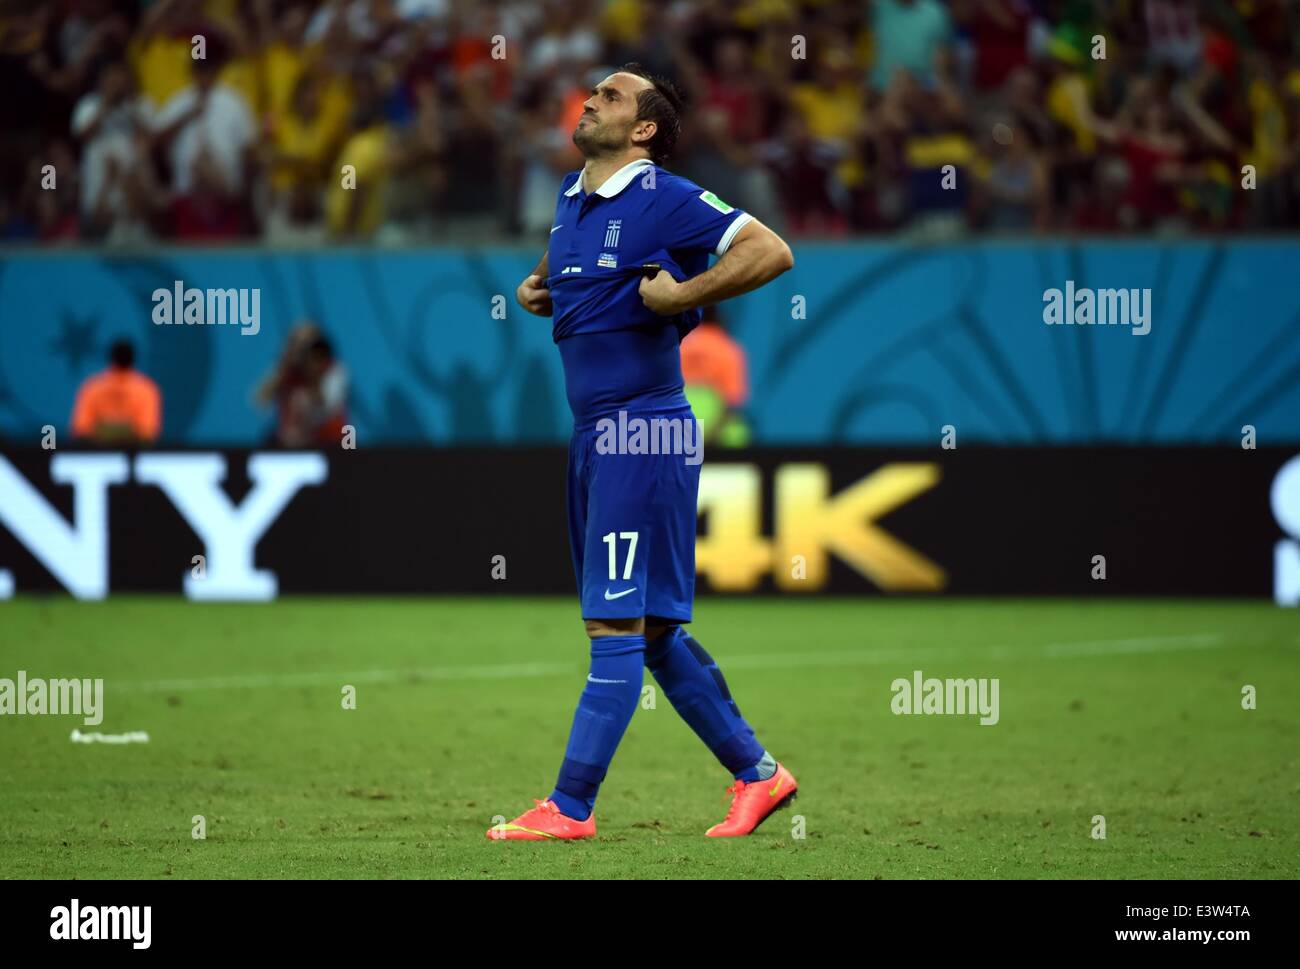 (140629) -- RECIFE, June 29, 2014 (Xinhua) -- Greece's Theofanis Gekas reacs after the penalty shoot-out of a Round of 16 match between Costa Rica and Greece of 2014 FIFA World Cup at the Arena Pernambuco Stadium in Recife, Brazil, on June 29, 2014. Costa Rica won 6-4 (5-3 in penalties) over Greece and qualified for quarter-finals on Sunday. (Xinhua/Guo Yong)(rh) Stock Photo